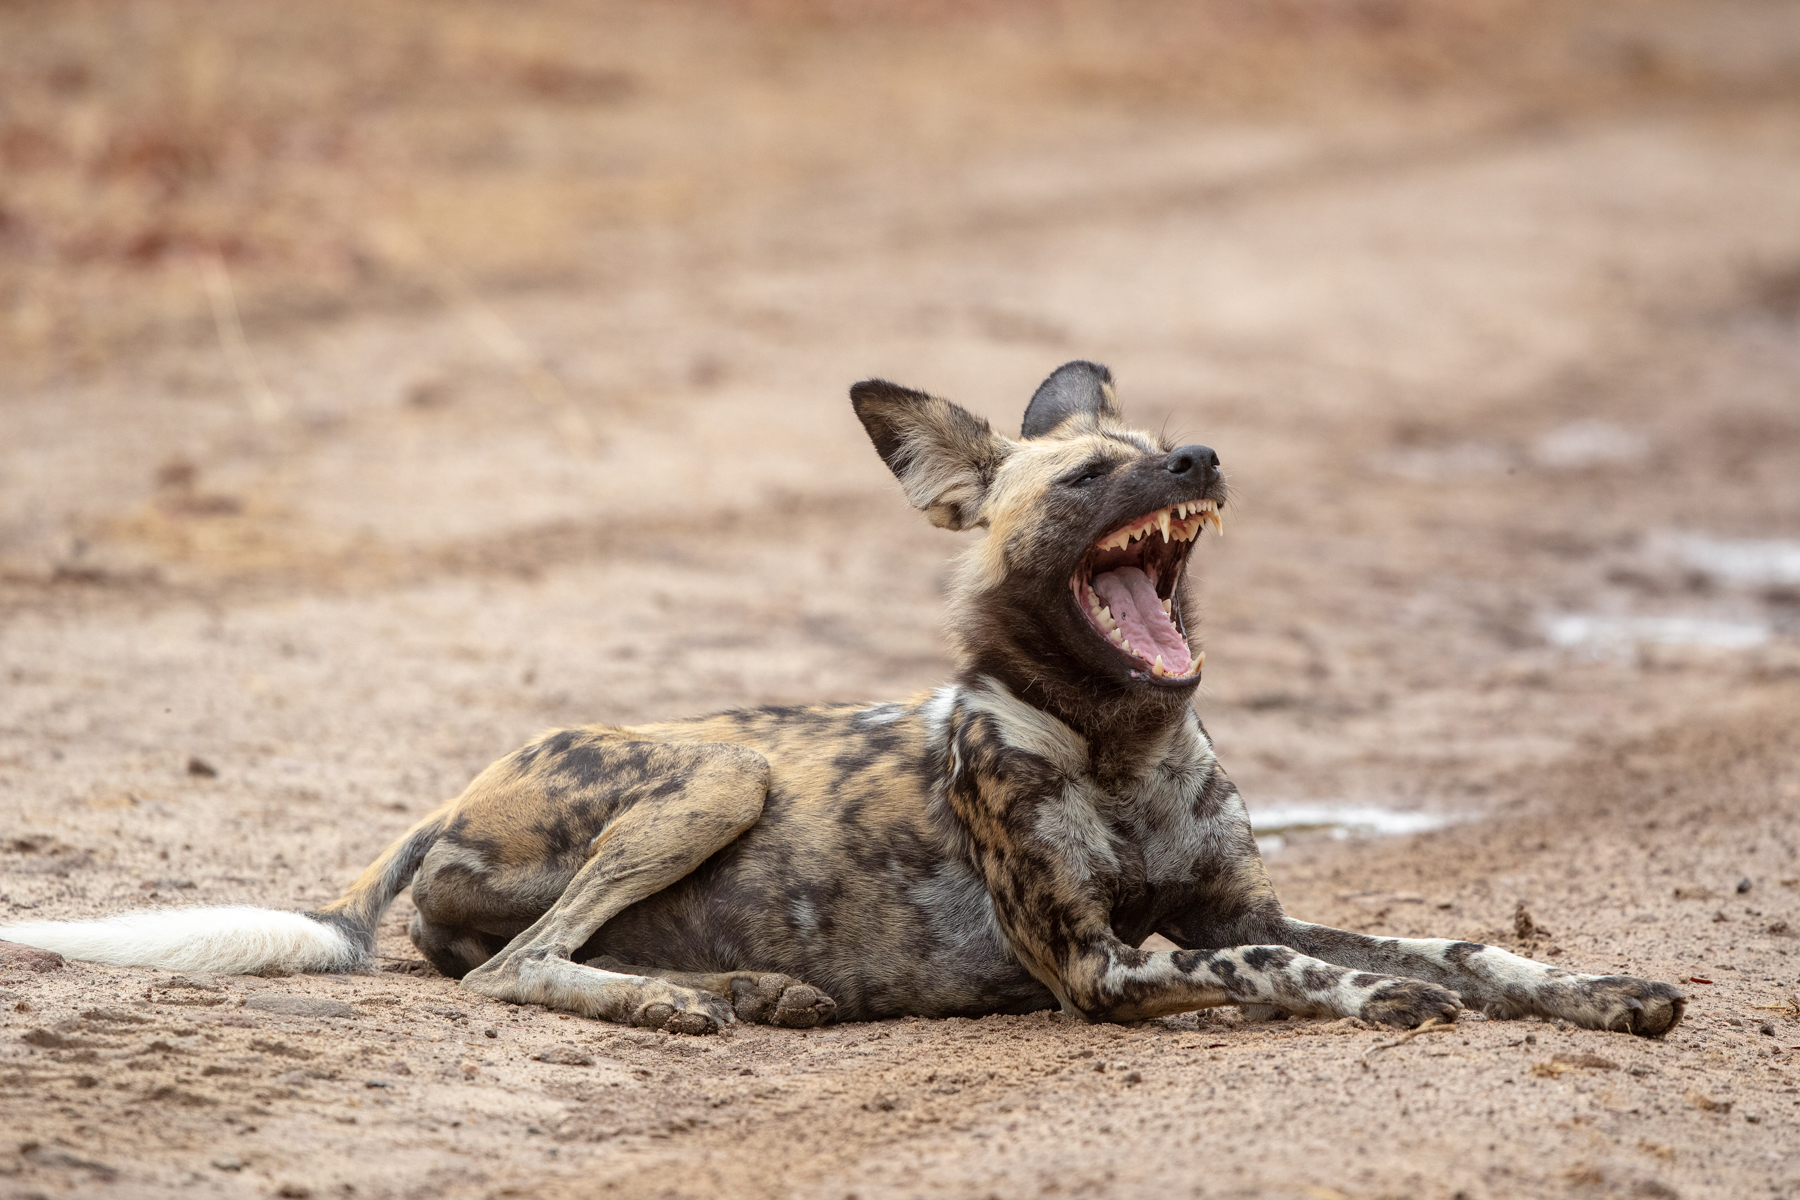 The Painted Wolf (or African Wild Dog) is a fearsome predator